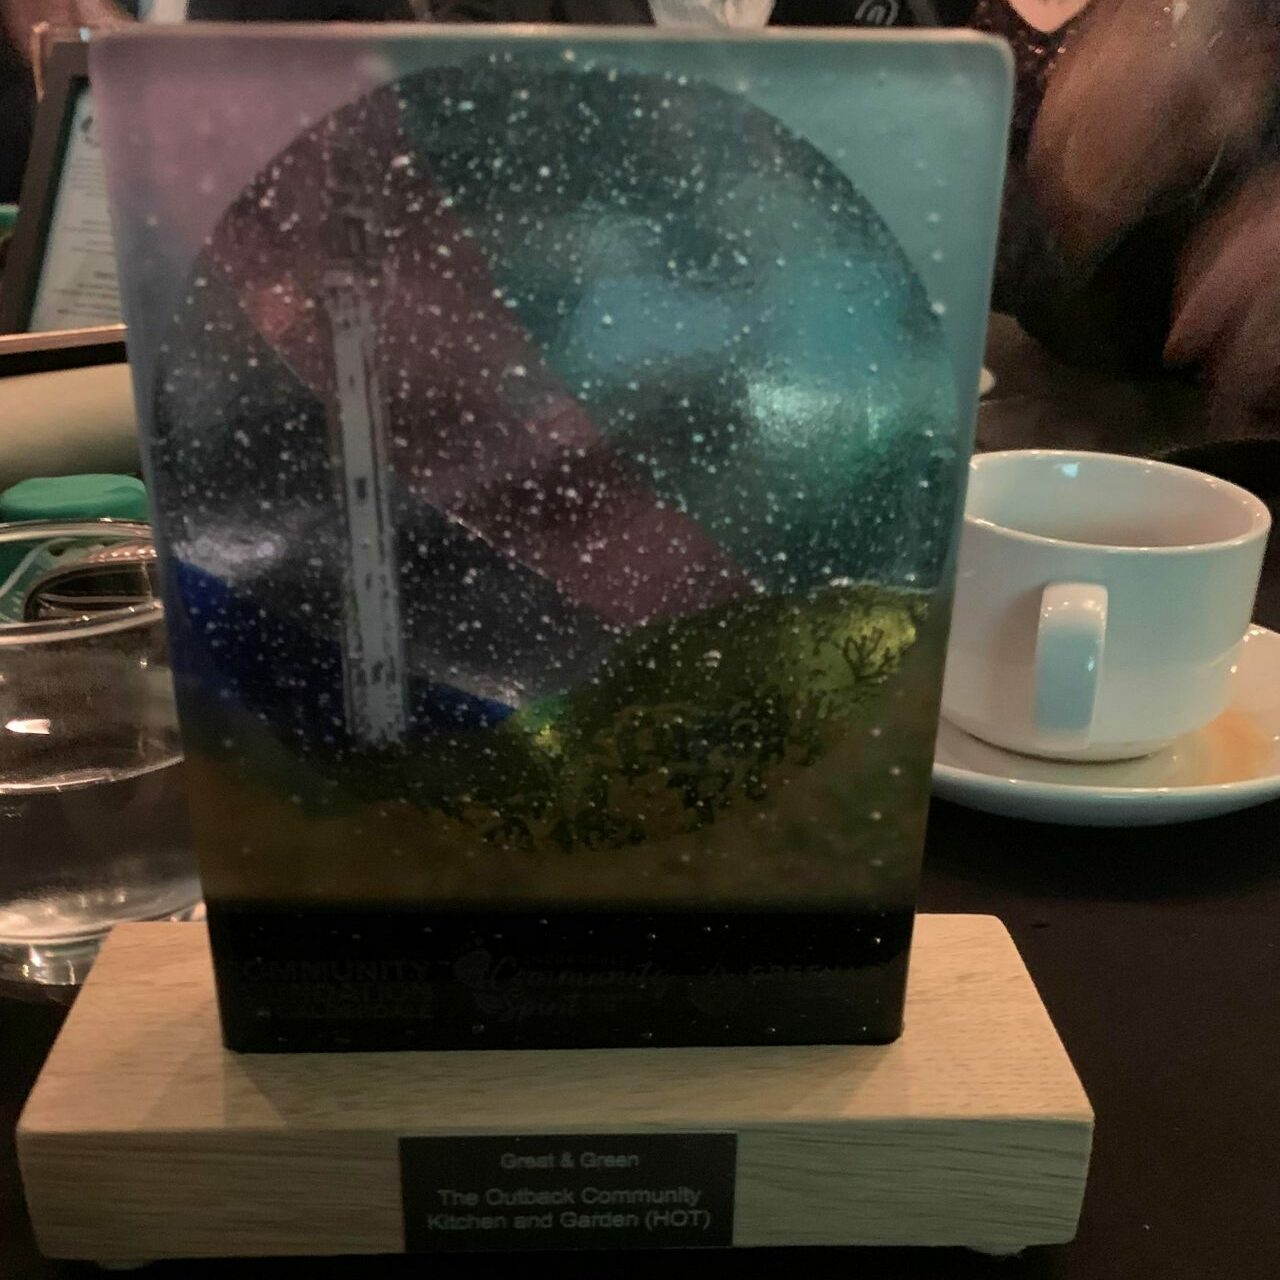 A beautiful award for Great and Green